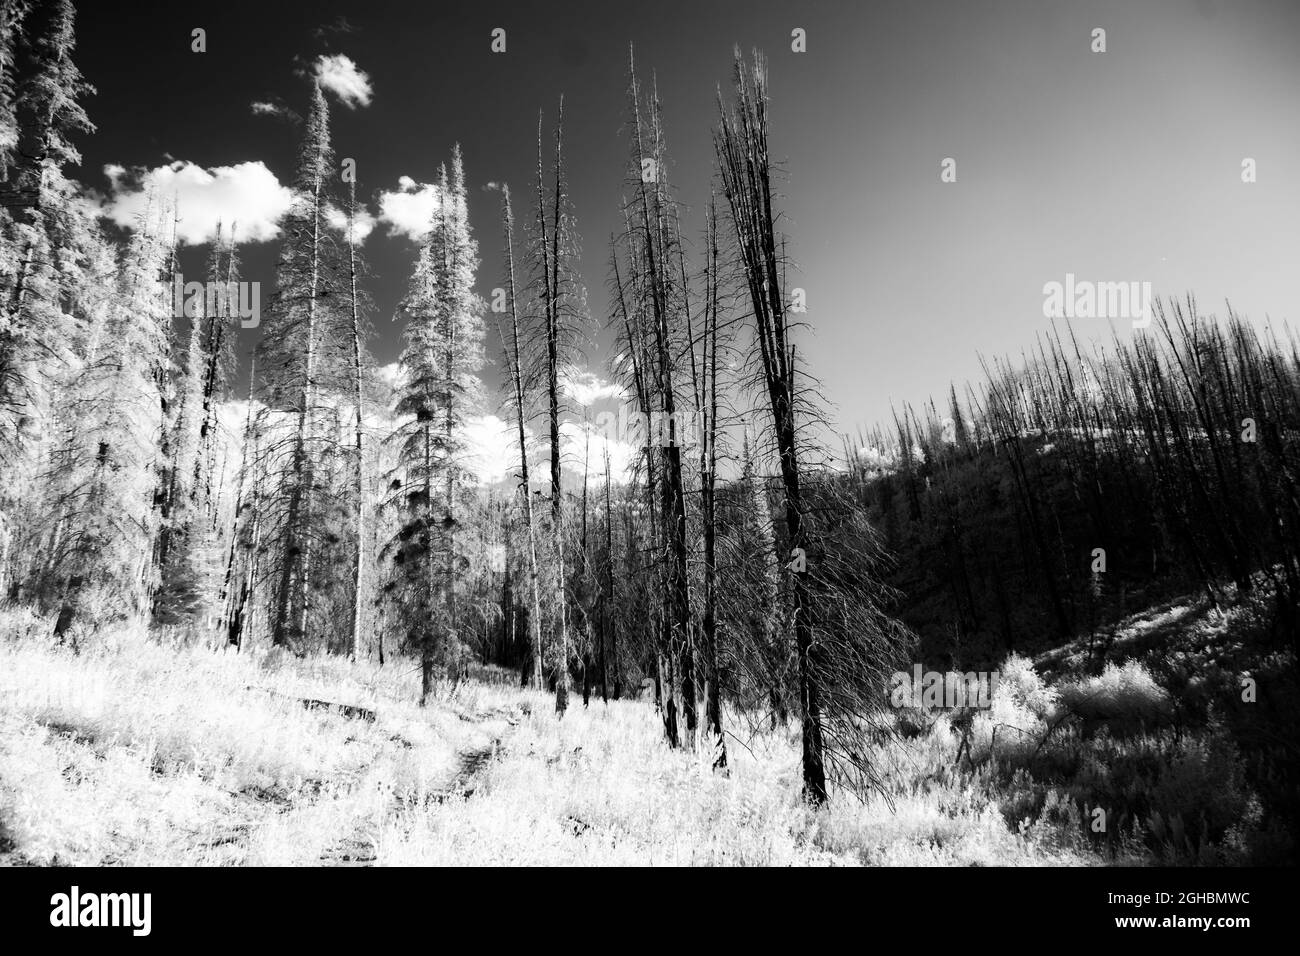 Some dead and damaged spruce trees northwest of Steamboat Springs in Colorado.  Imaged in black and white infrared light.  Some trees are fire damage. Stock Photo